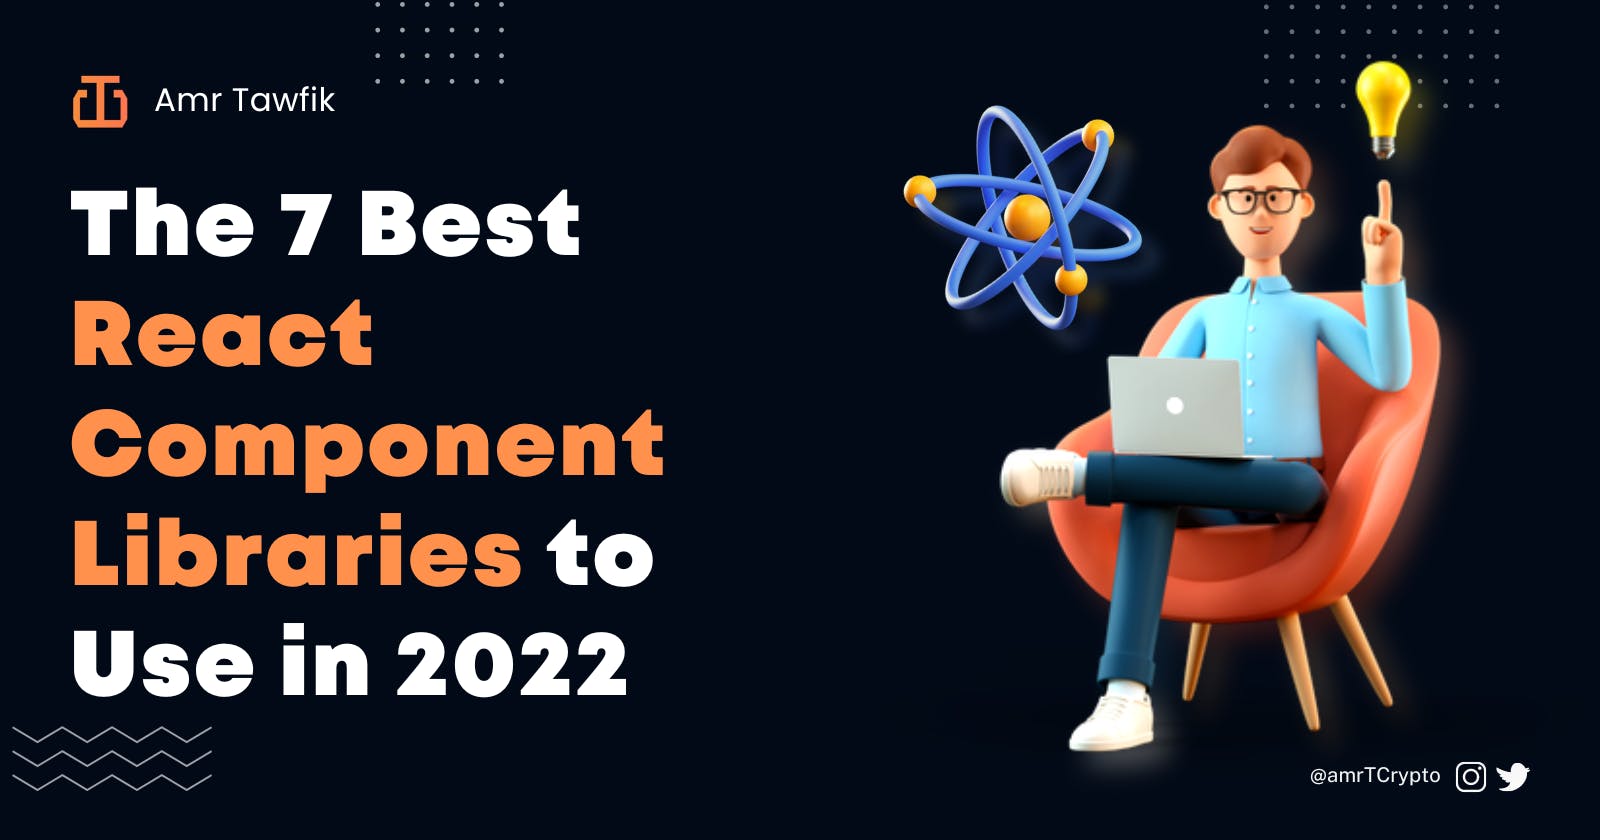 The 7 best react component libraries to use in 2022